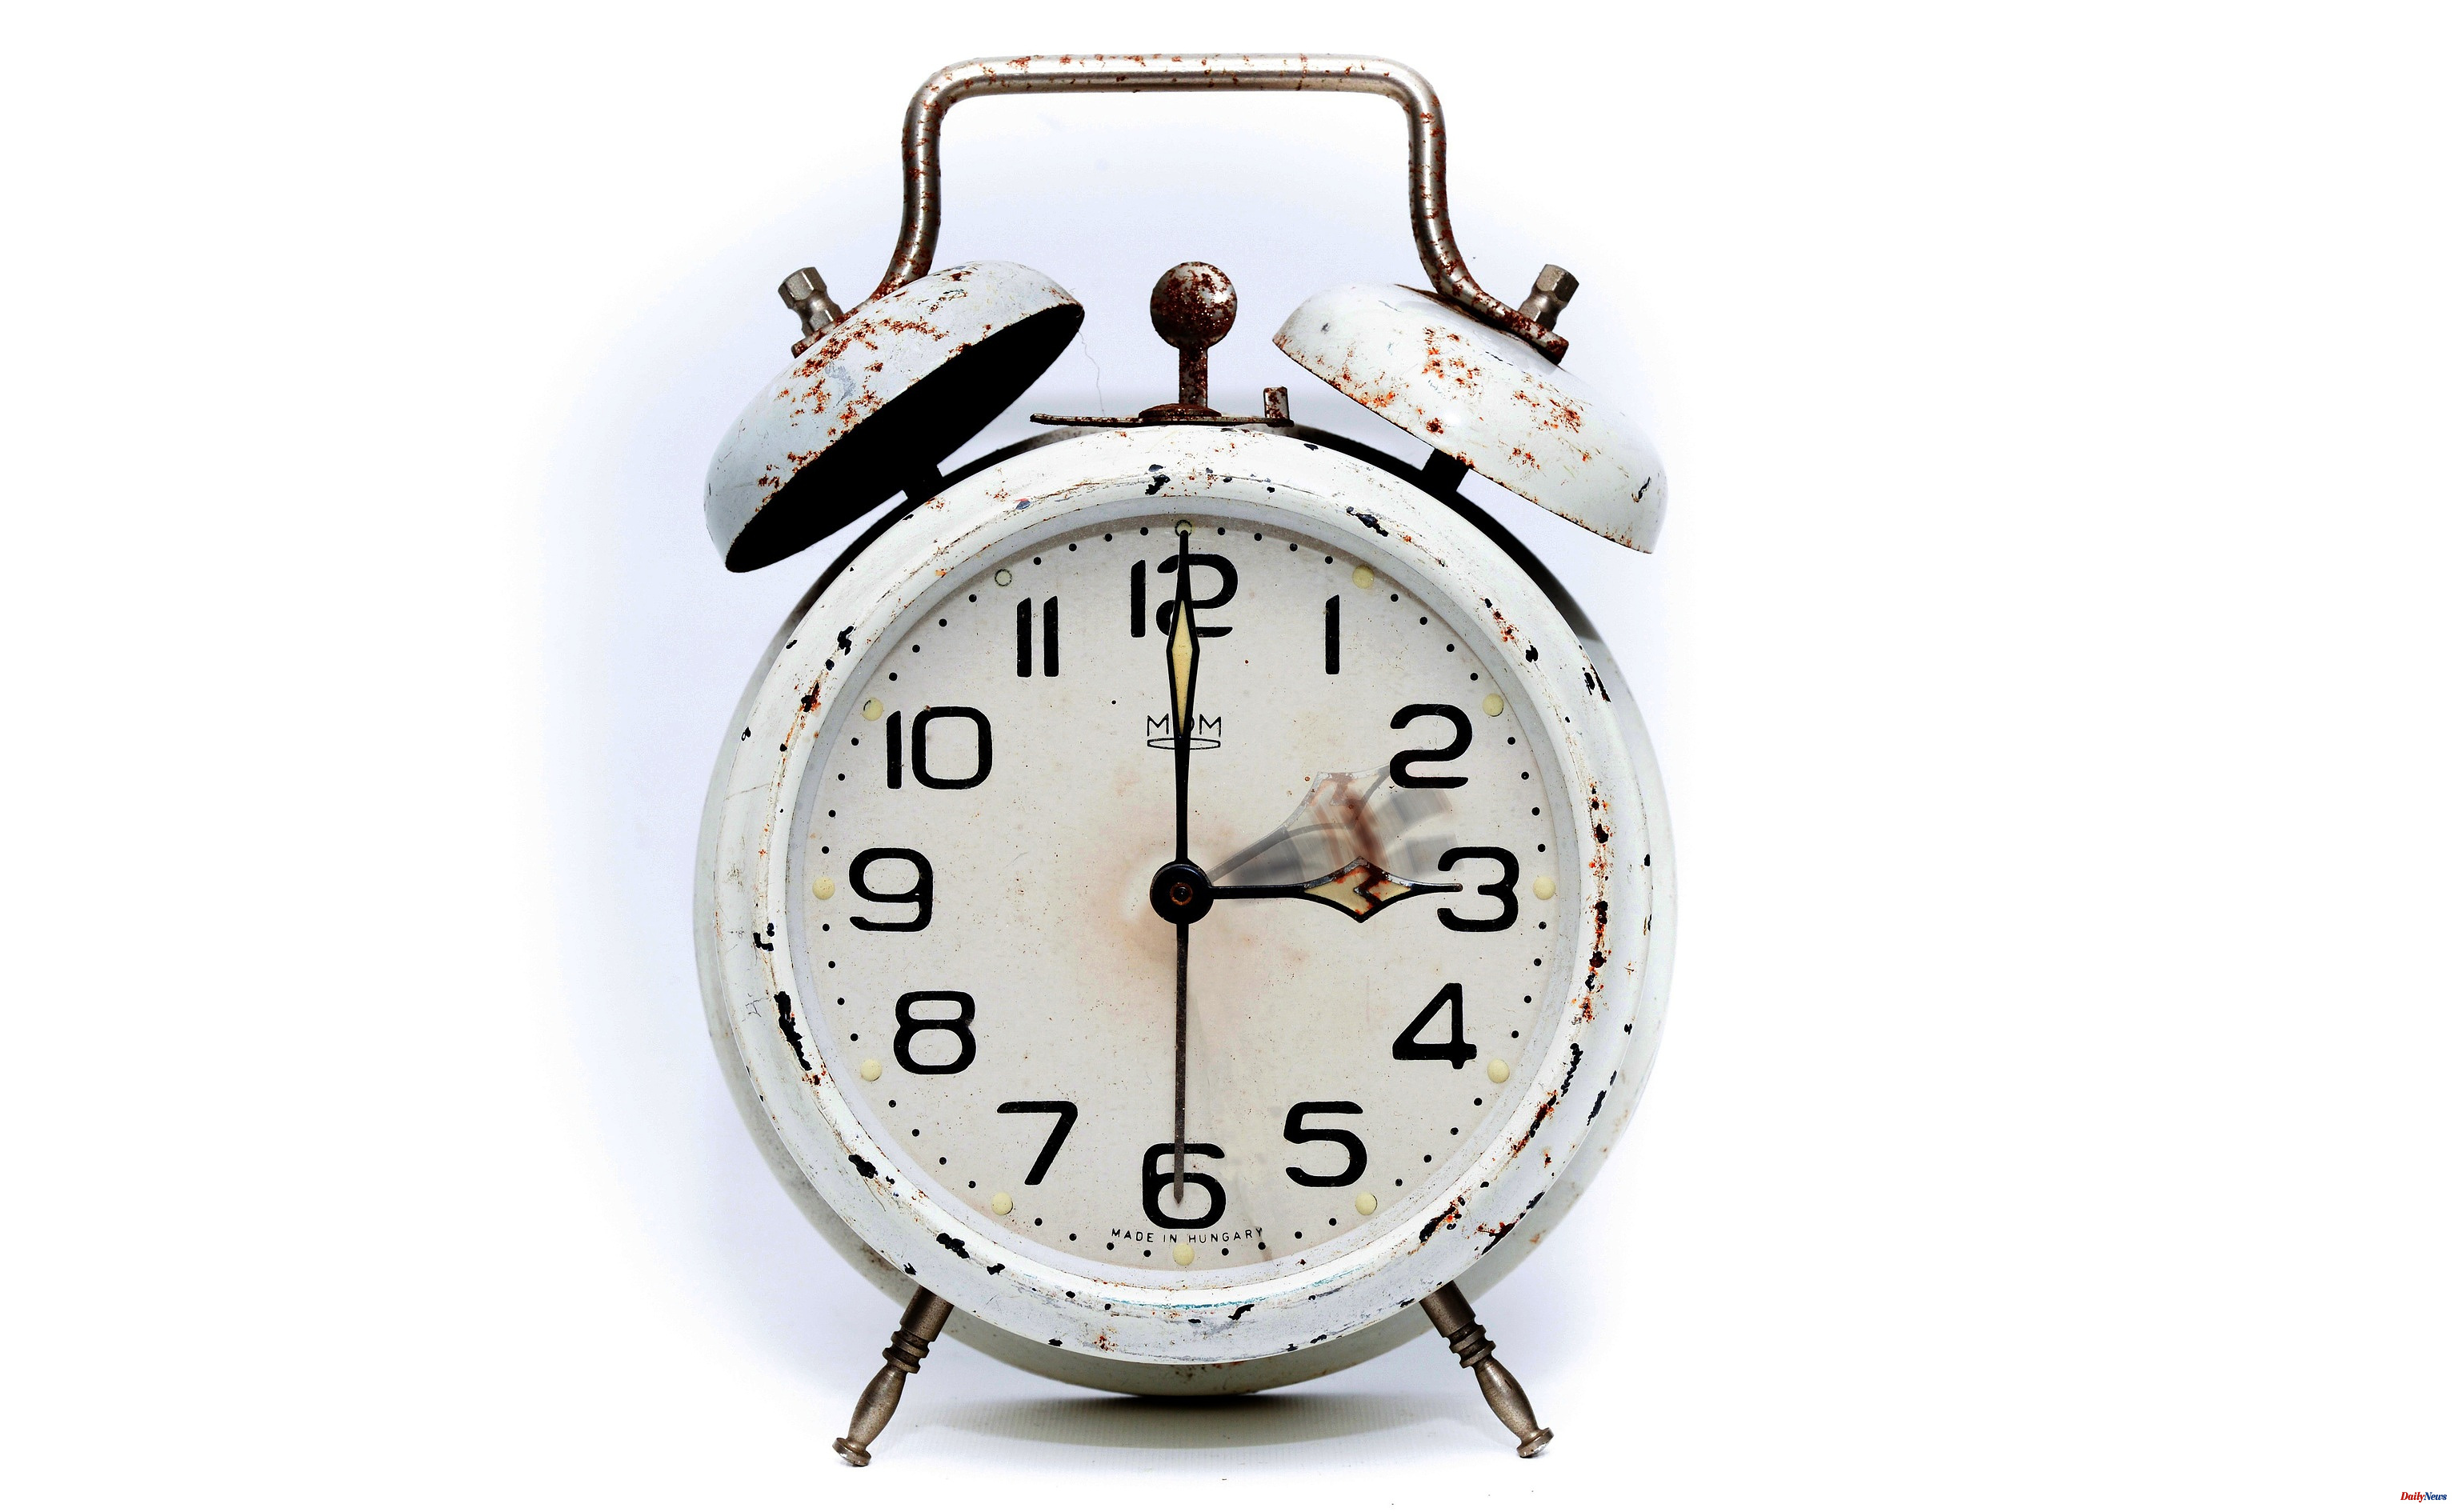 Agenda March 2023 time change: will we have to move the clock forward or backward?